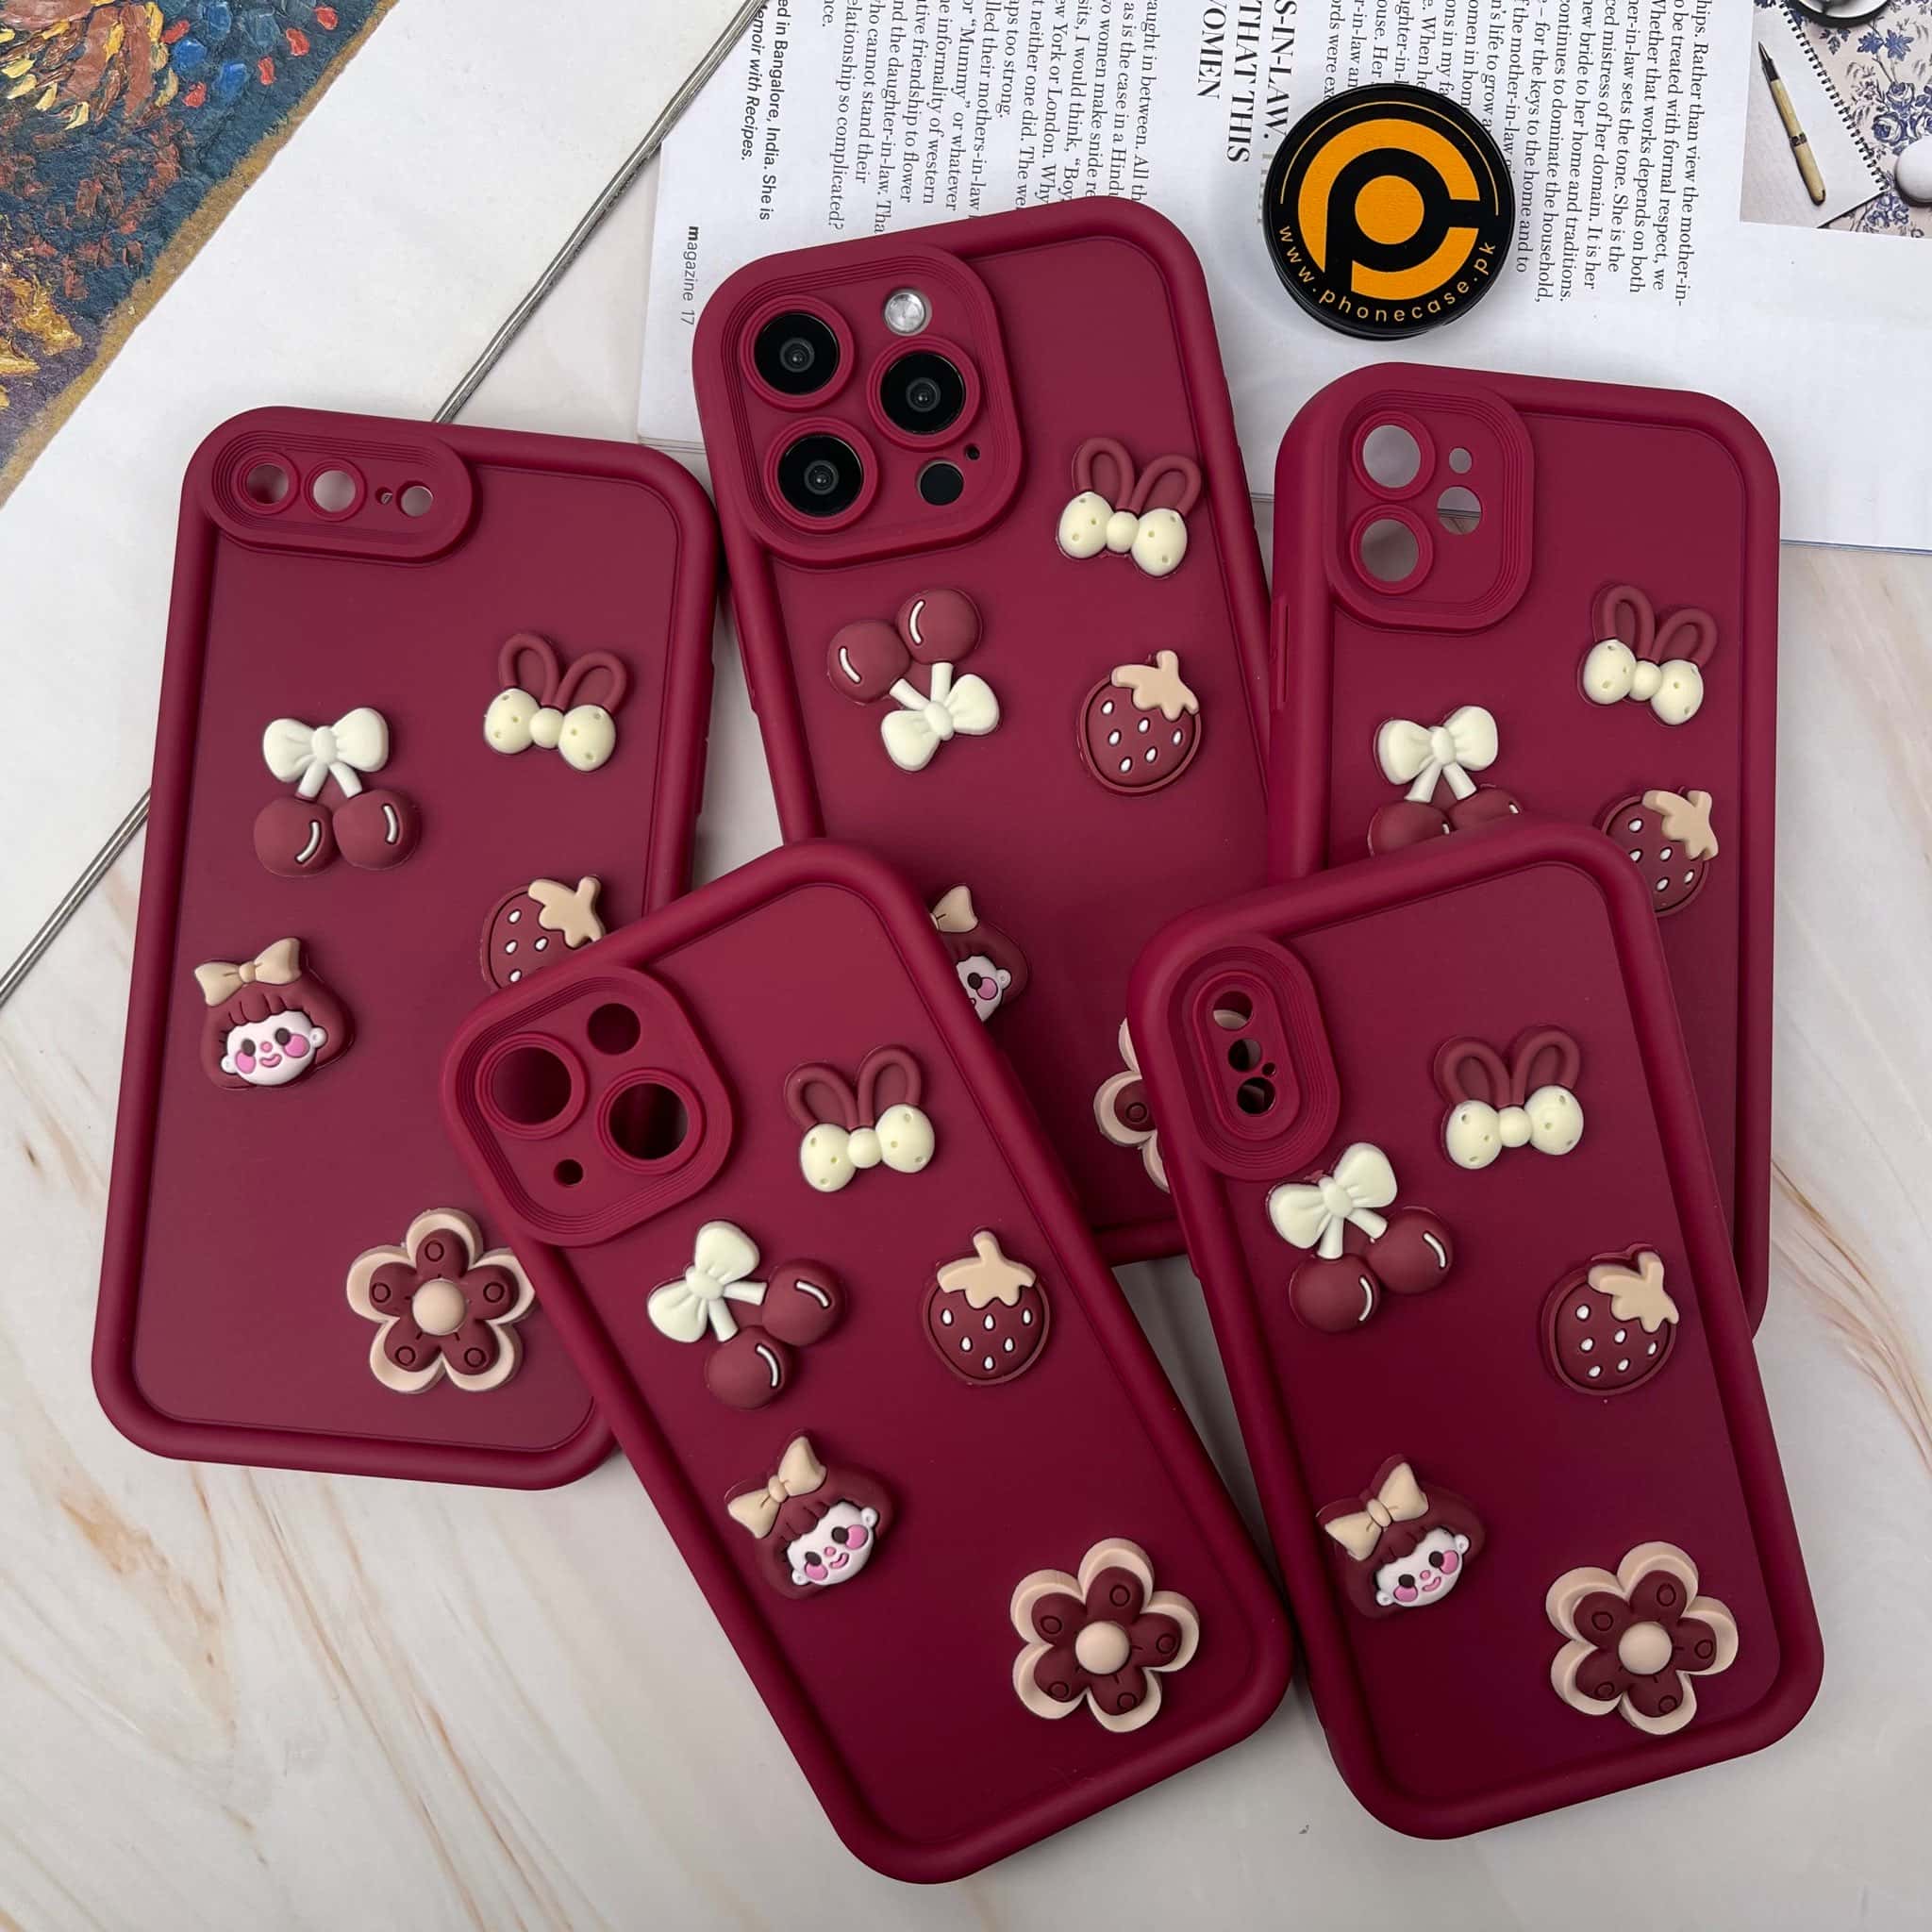 iPhone 12 Pro Max Cute 3D Cherry Flower Icons Silicon Case